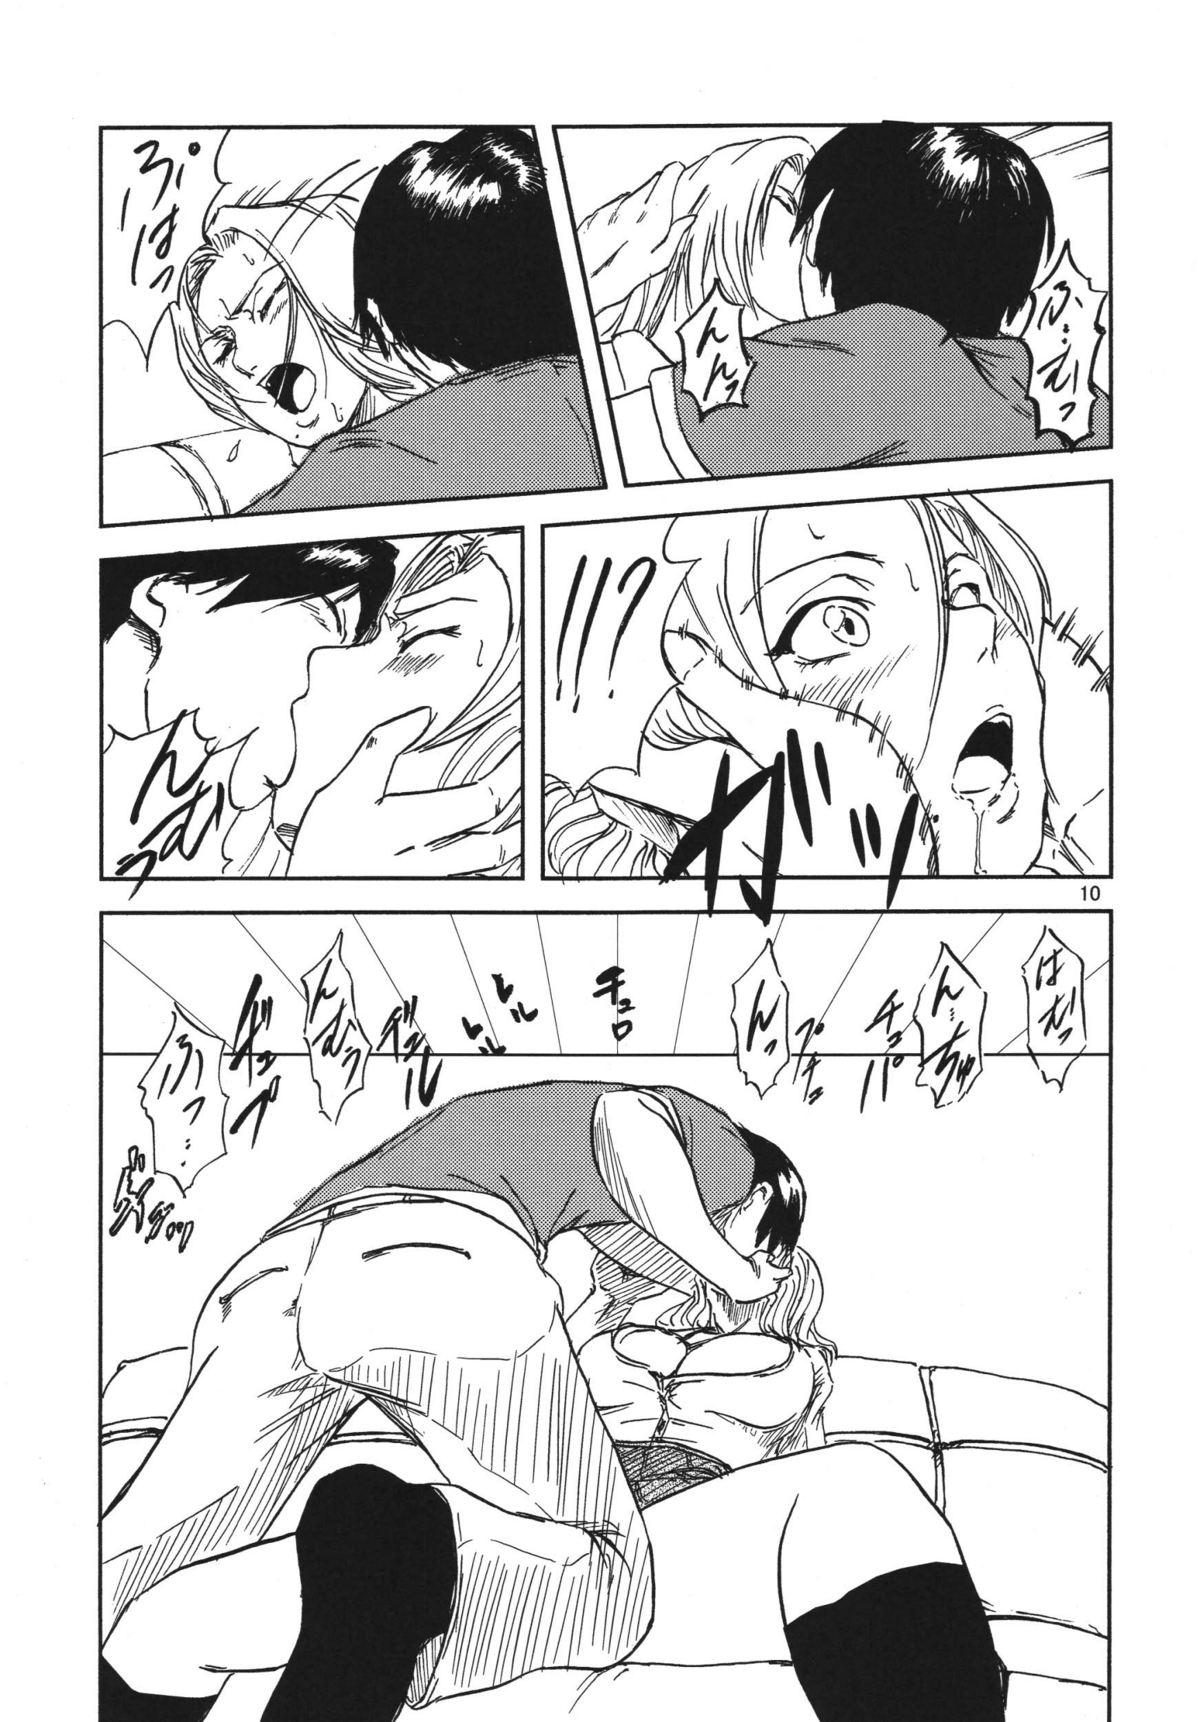 Pee NO MERCY 3 - Bleach Workout - Page 10